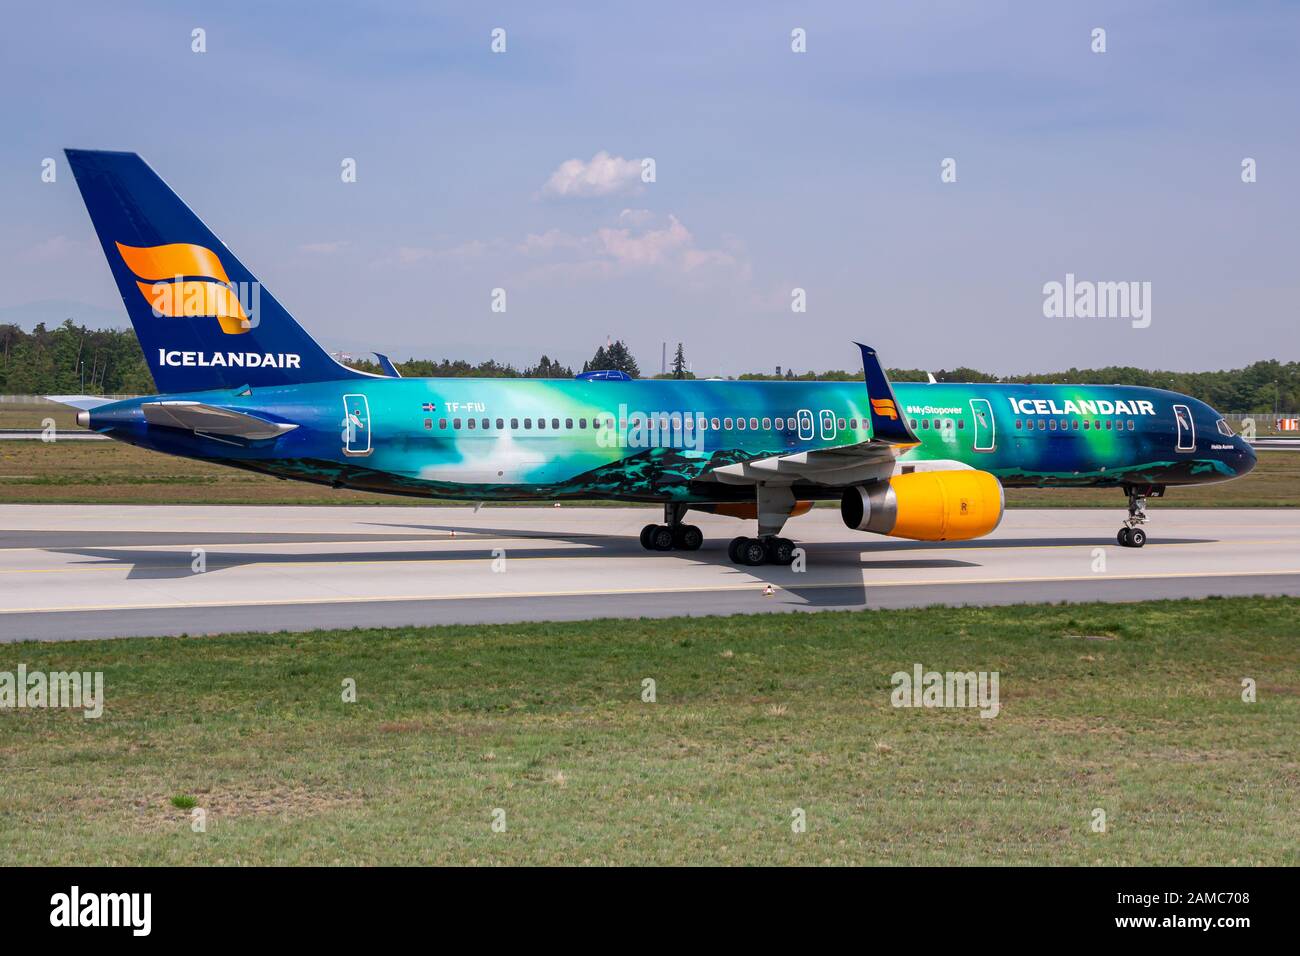 Frankfurt, Germany - April 22, 2018: Icelandair Boeing 757 airplane at Frankfurt airport (FRA) in the Germany. Boeing is an aircraft manufacturer base Stock Photo